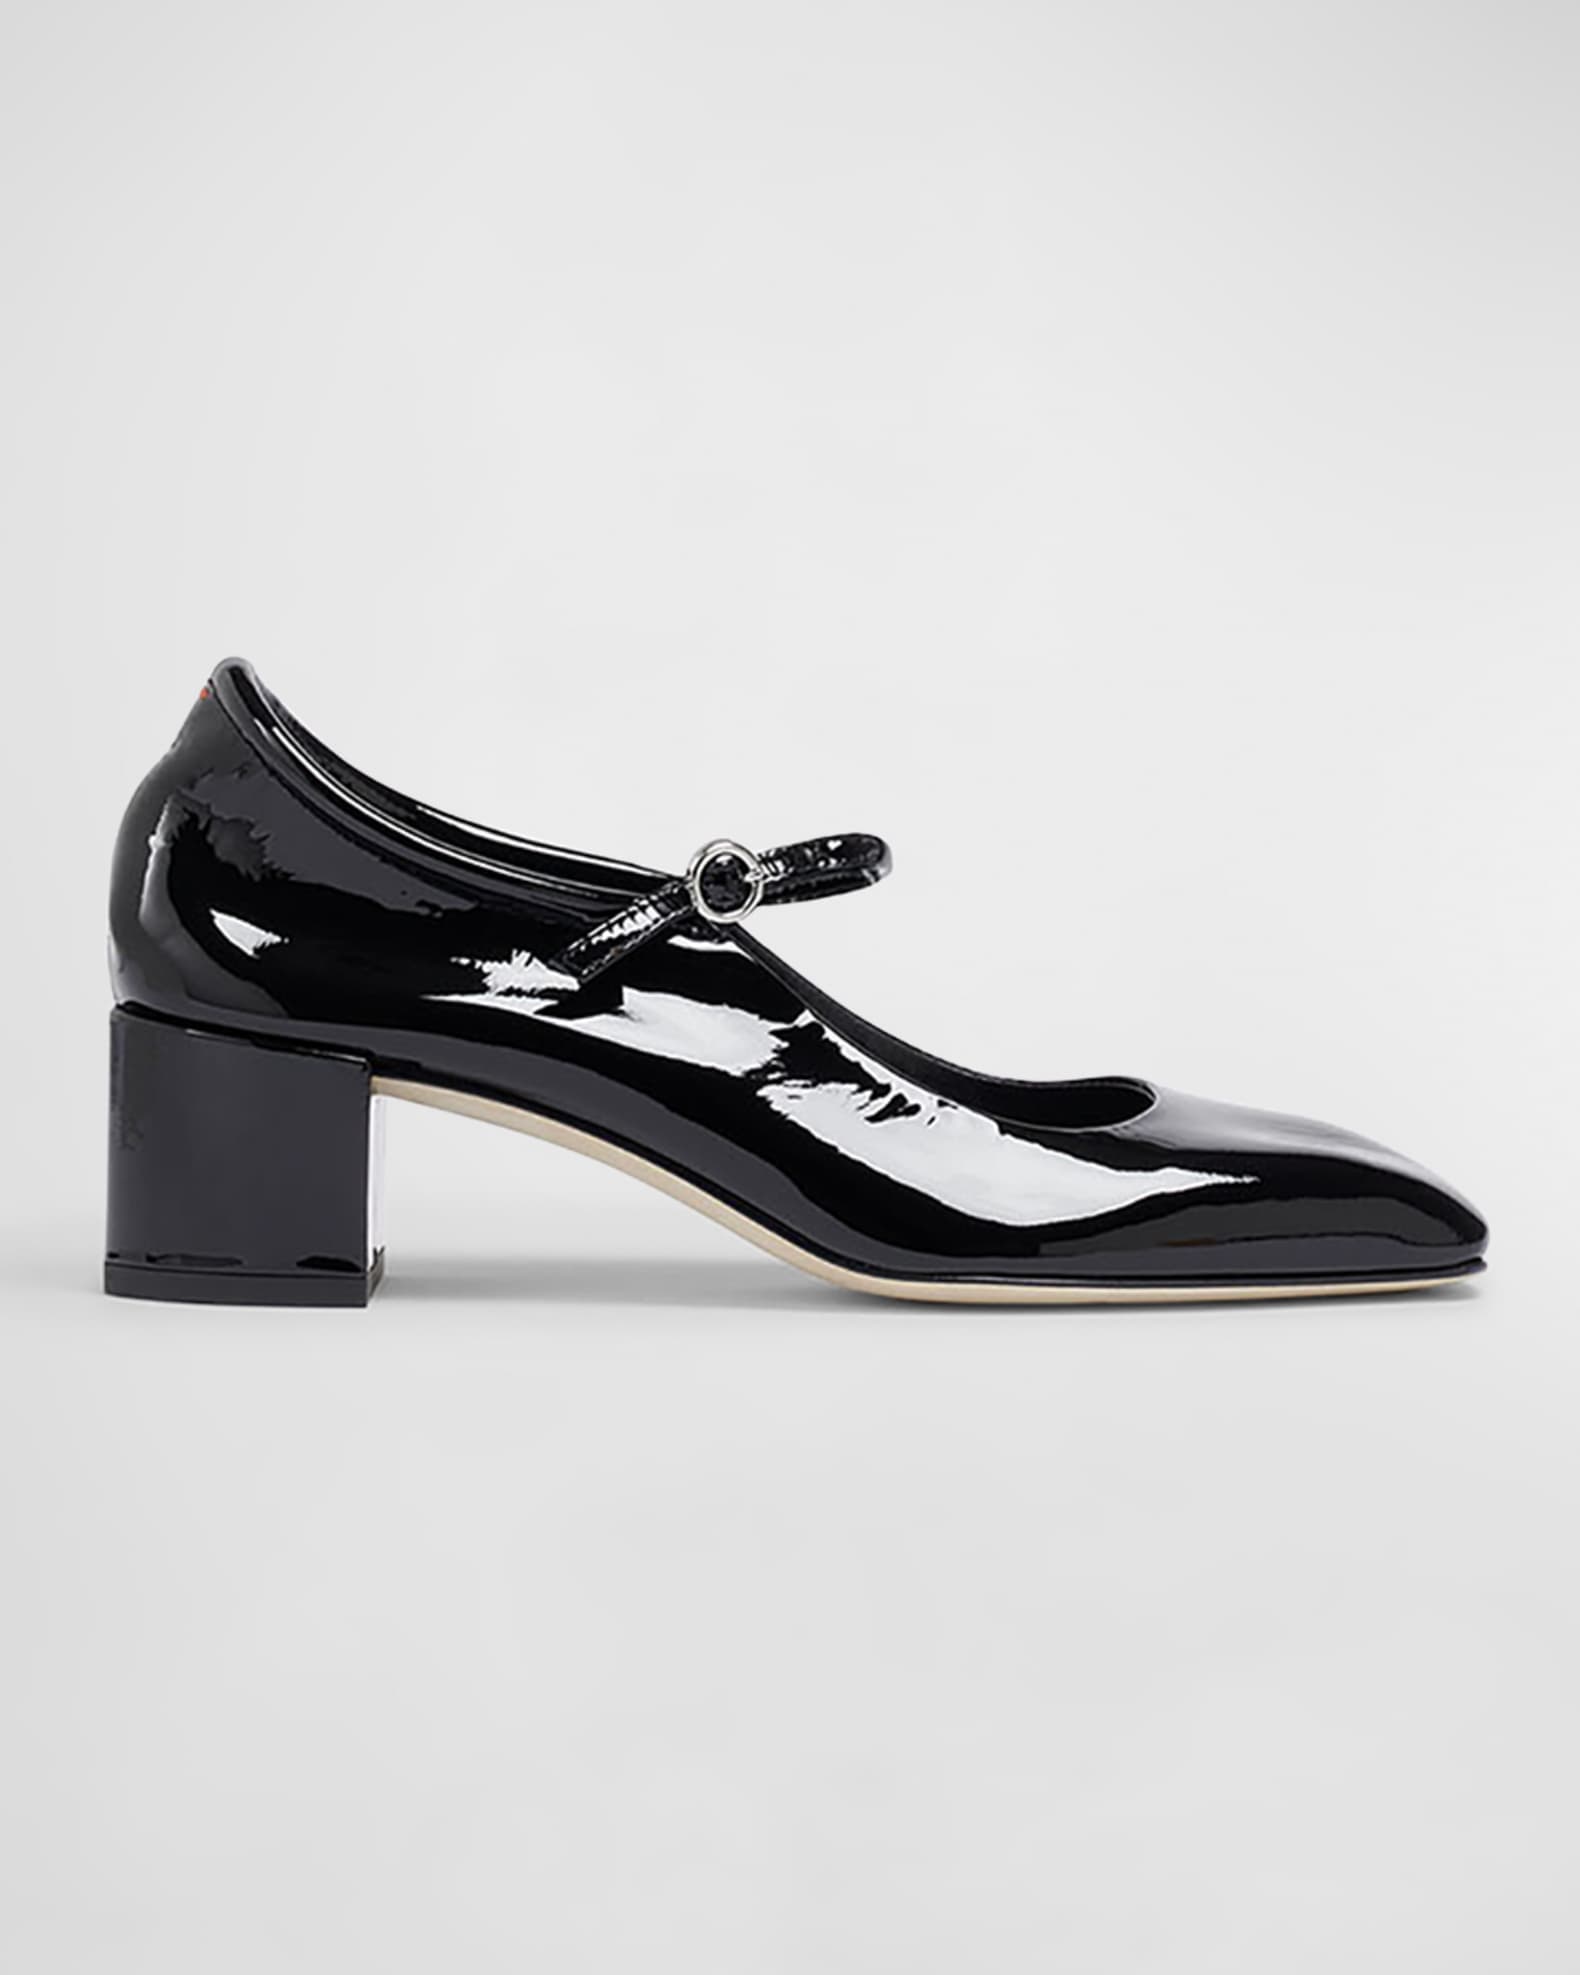 Aeyde Aline Patent Mary Jane Pumps | Neiman Marcus